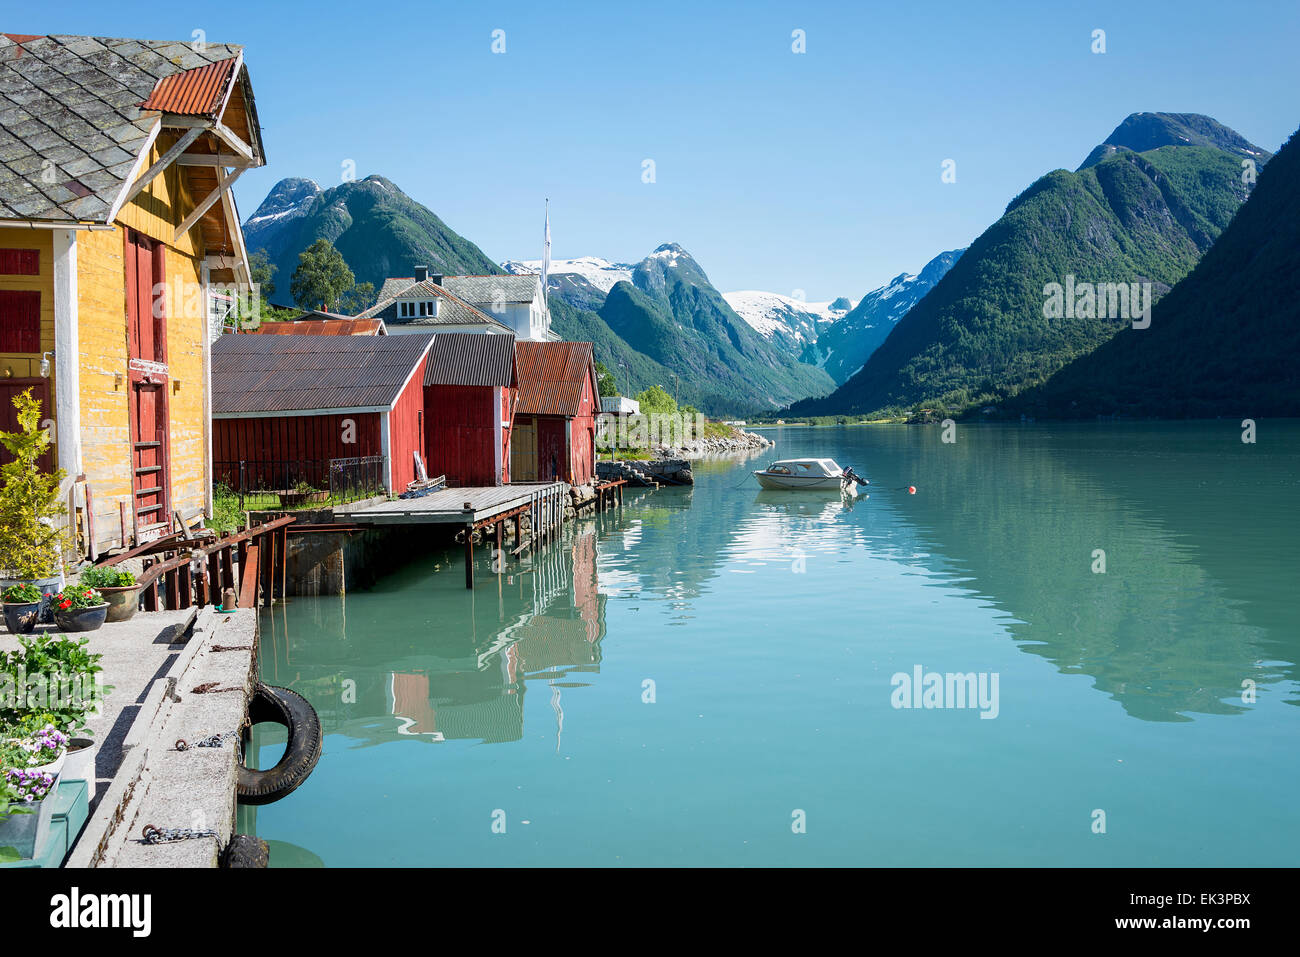 View over the fjord Fjaerlandsfjord and the small village of Mundal (or Fjaerland) with some snow-capped mountains in Norway. Stock Photo